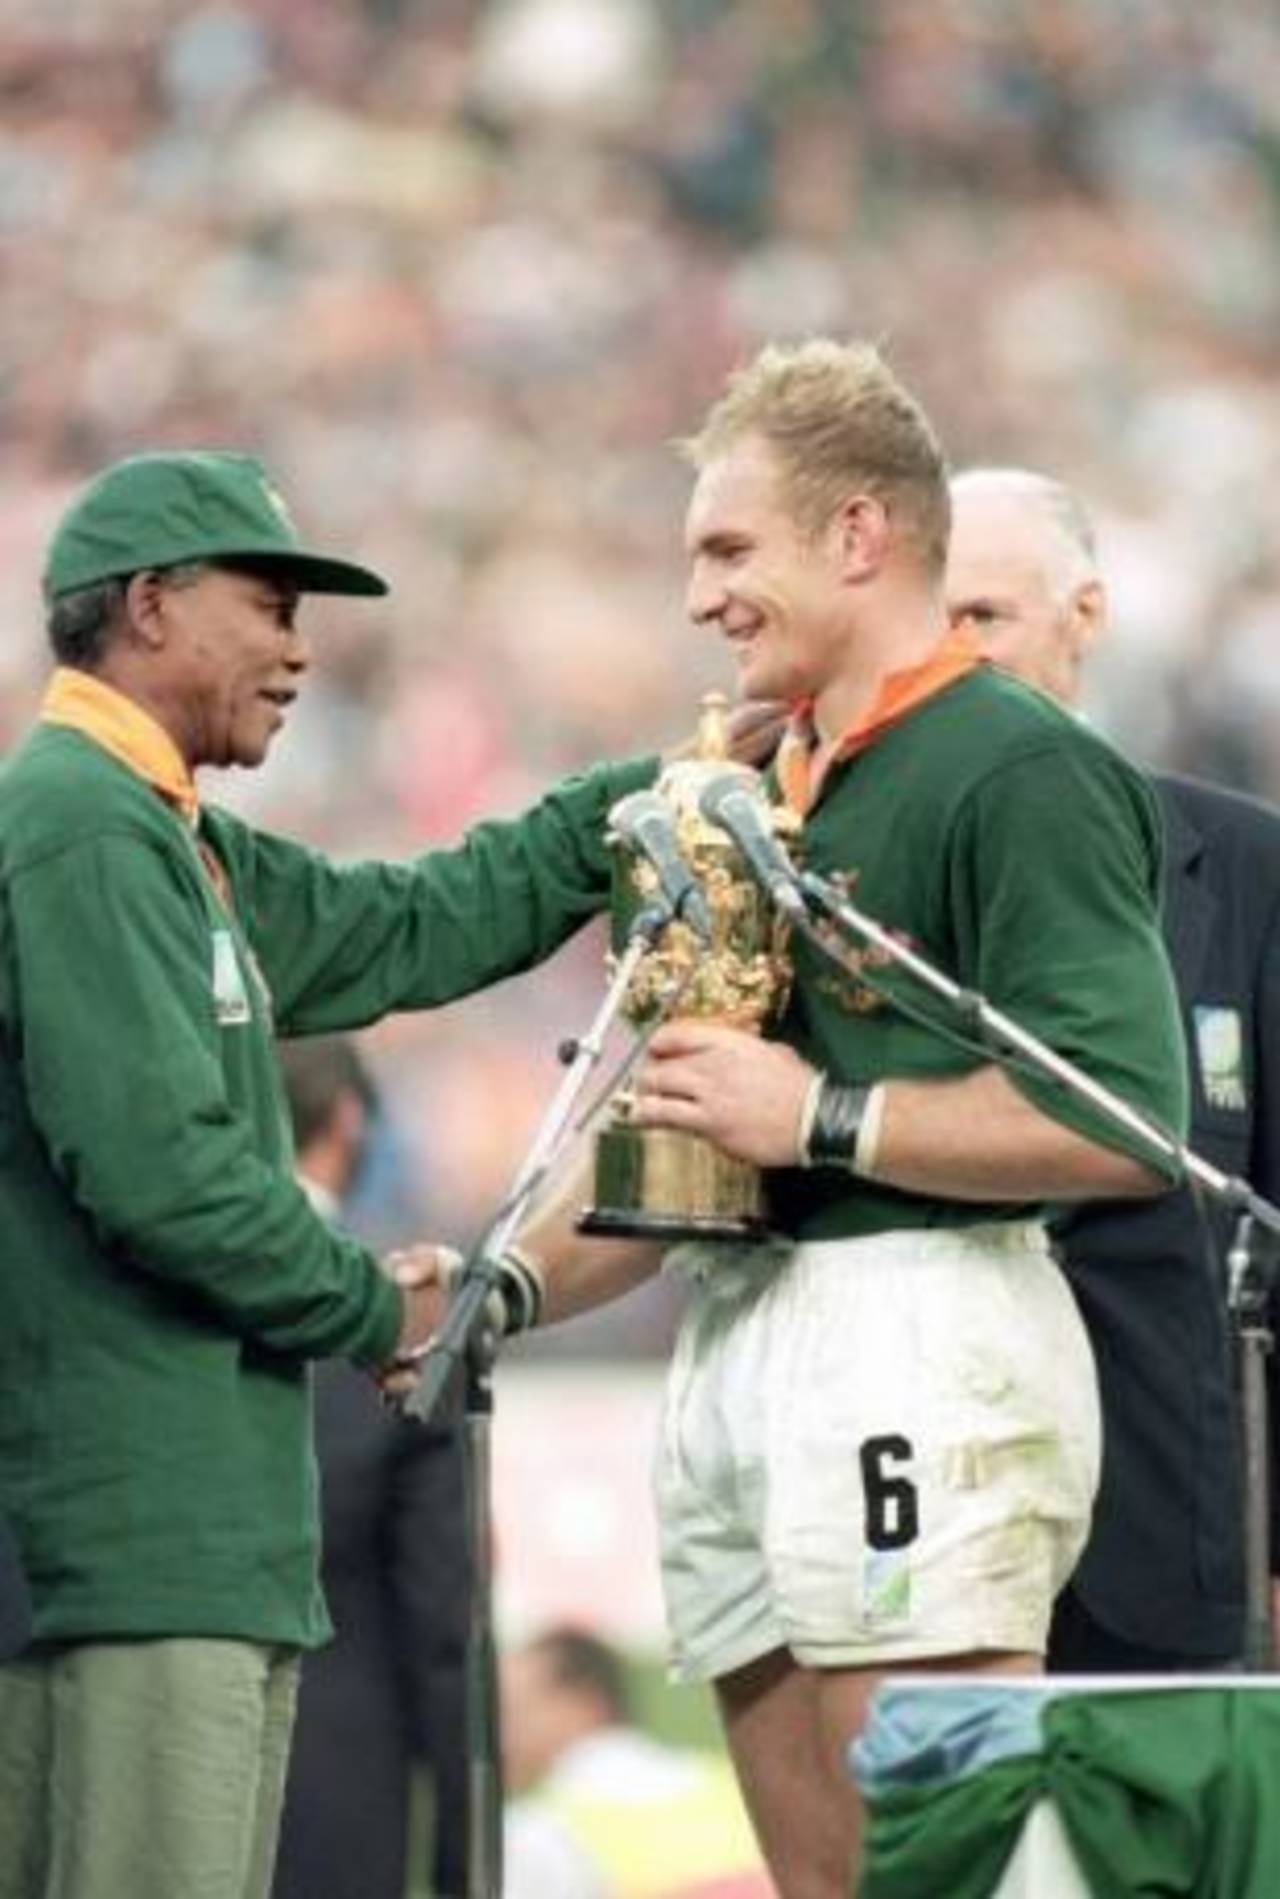 Among South Africa's epochal sporting moments has been the 1995 World Cup, when Nelson Mandela, wearing the team colours, presented the trophy to Francois Pienaar&nbsp;&nbsp;&bull;&nbsp;&nbsp;Dave Rogers/Getty Images